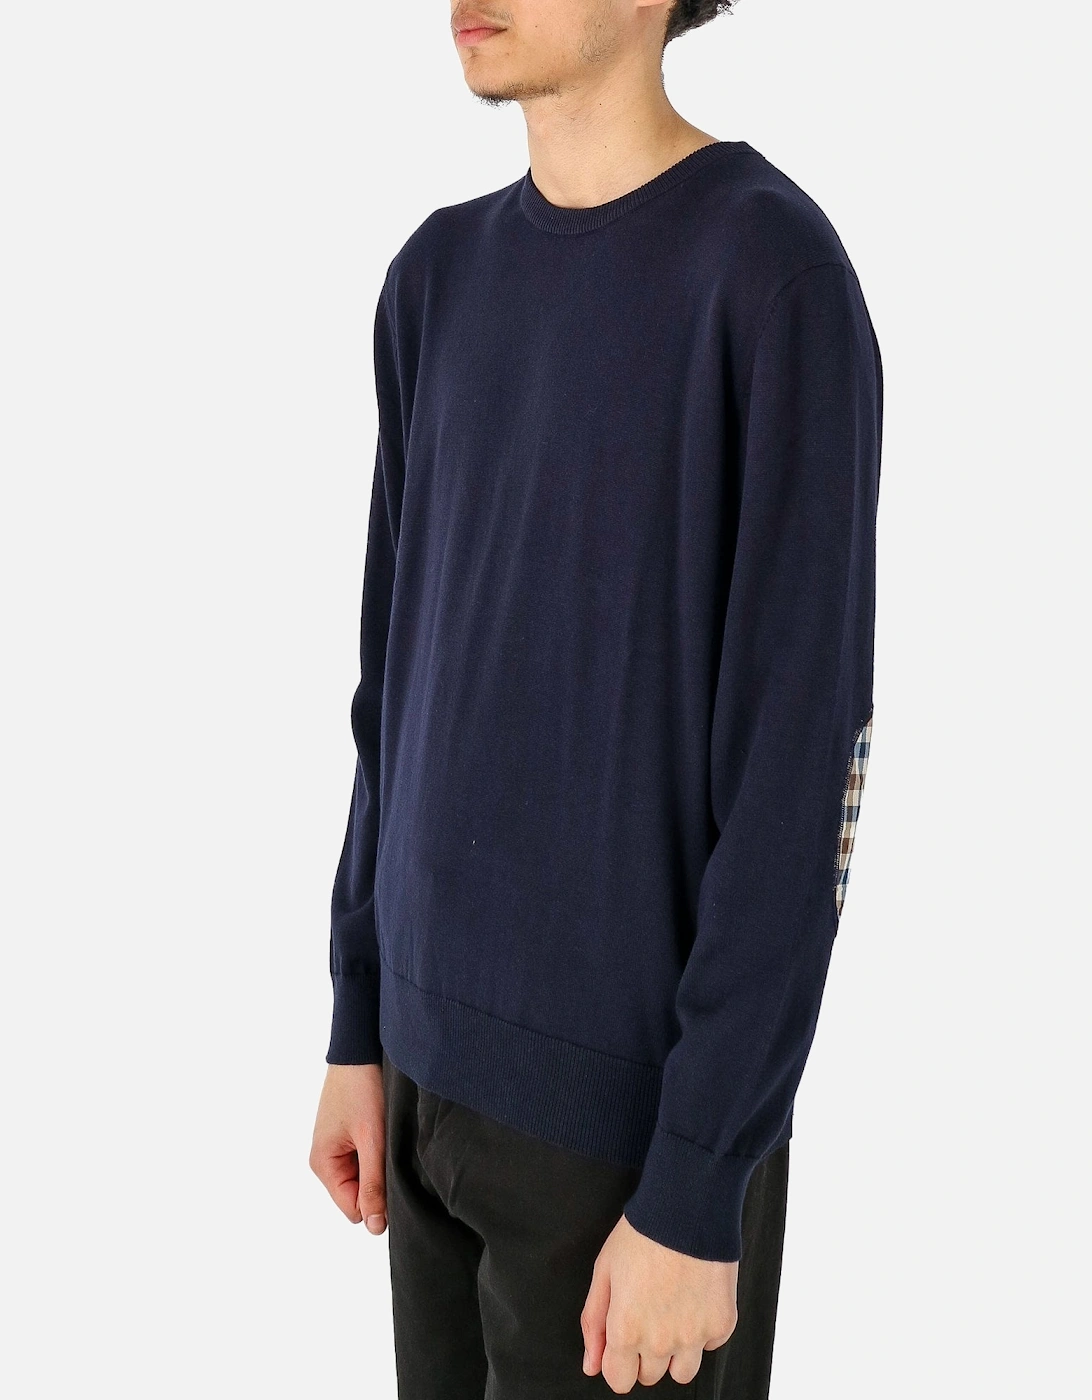 Check Elbow Patch Navy Knit